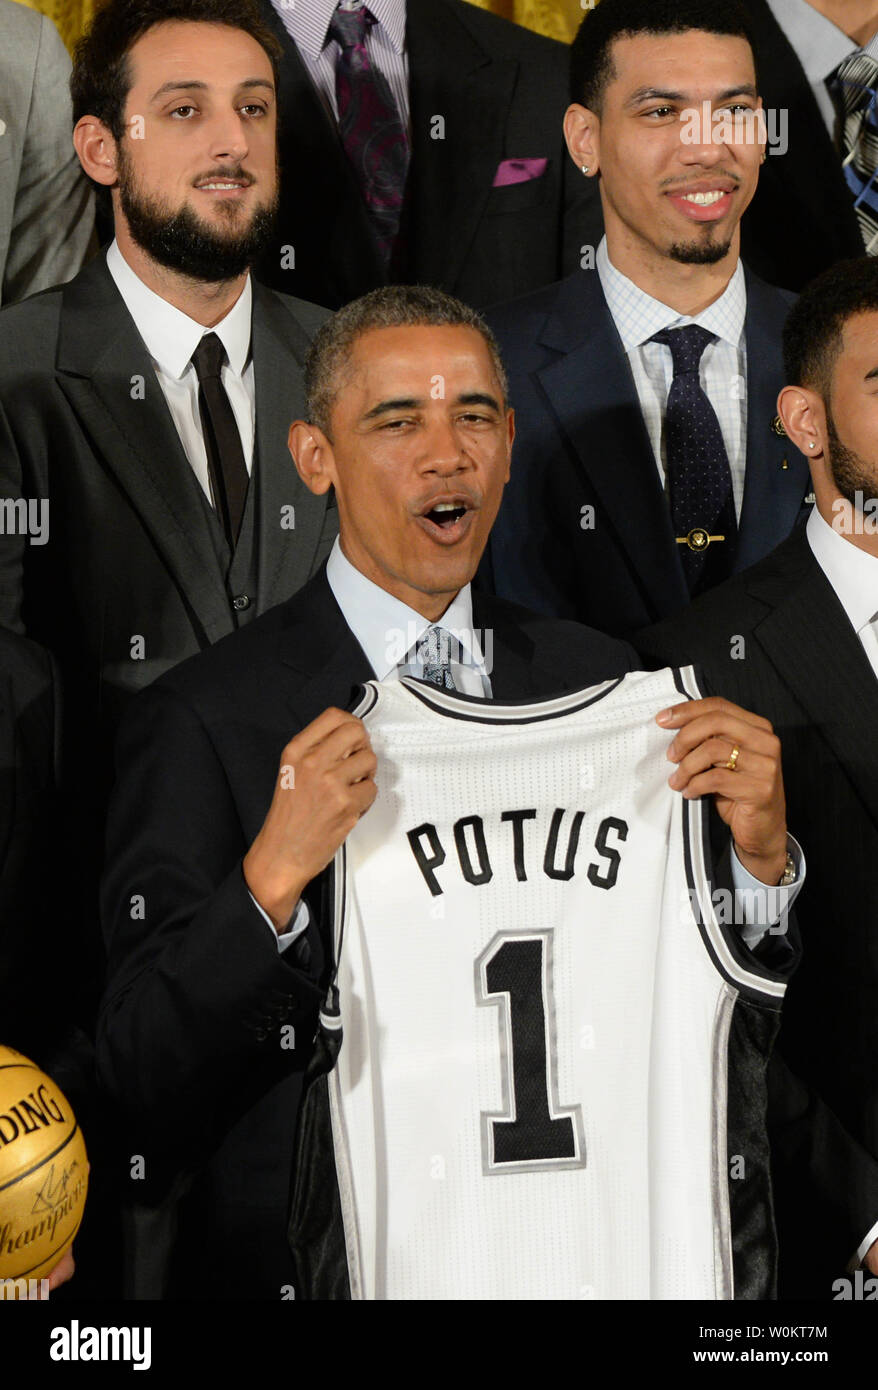 U.S. President Barack Obama receives a game jersey from San Antonio Spurs player Manu Ginobili (not shown) as Obama honors the 2014 NBA Champion Spurs in the East Room of the White House in Washington, DC. on January 12, 2015.  The Spurs won their fifth championship.   Photo by Pat Benic/UPI Stock Photo